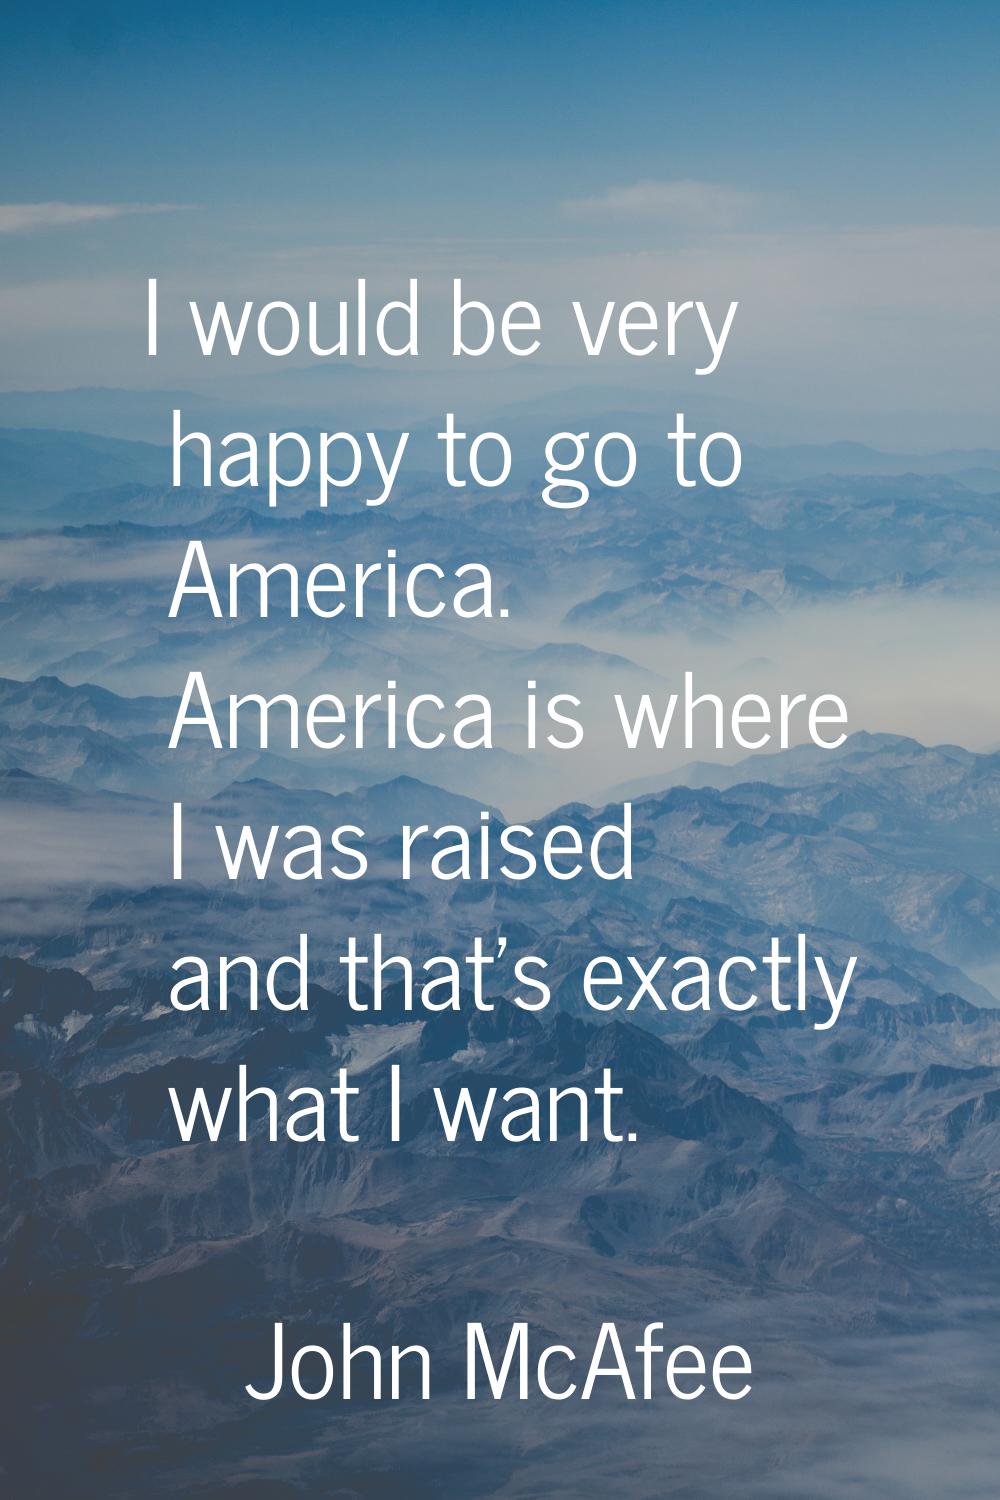 I would be very happy to go to America. America is where I was raised and that's exactly what I wan